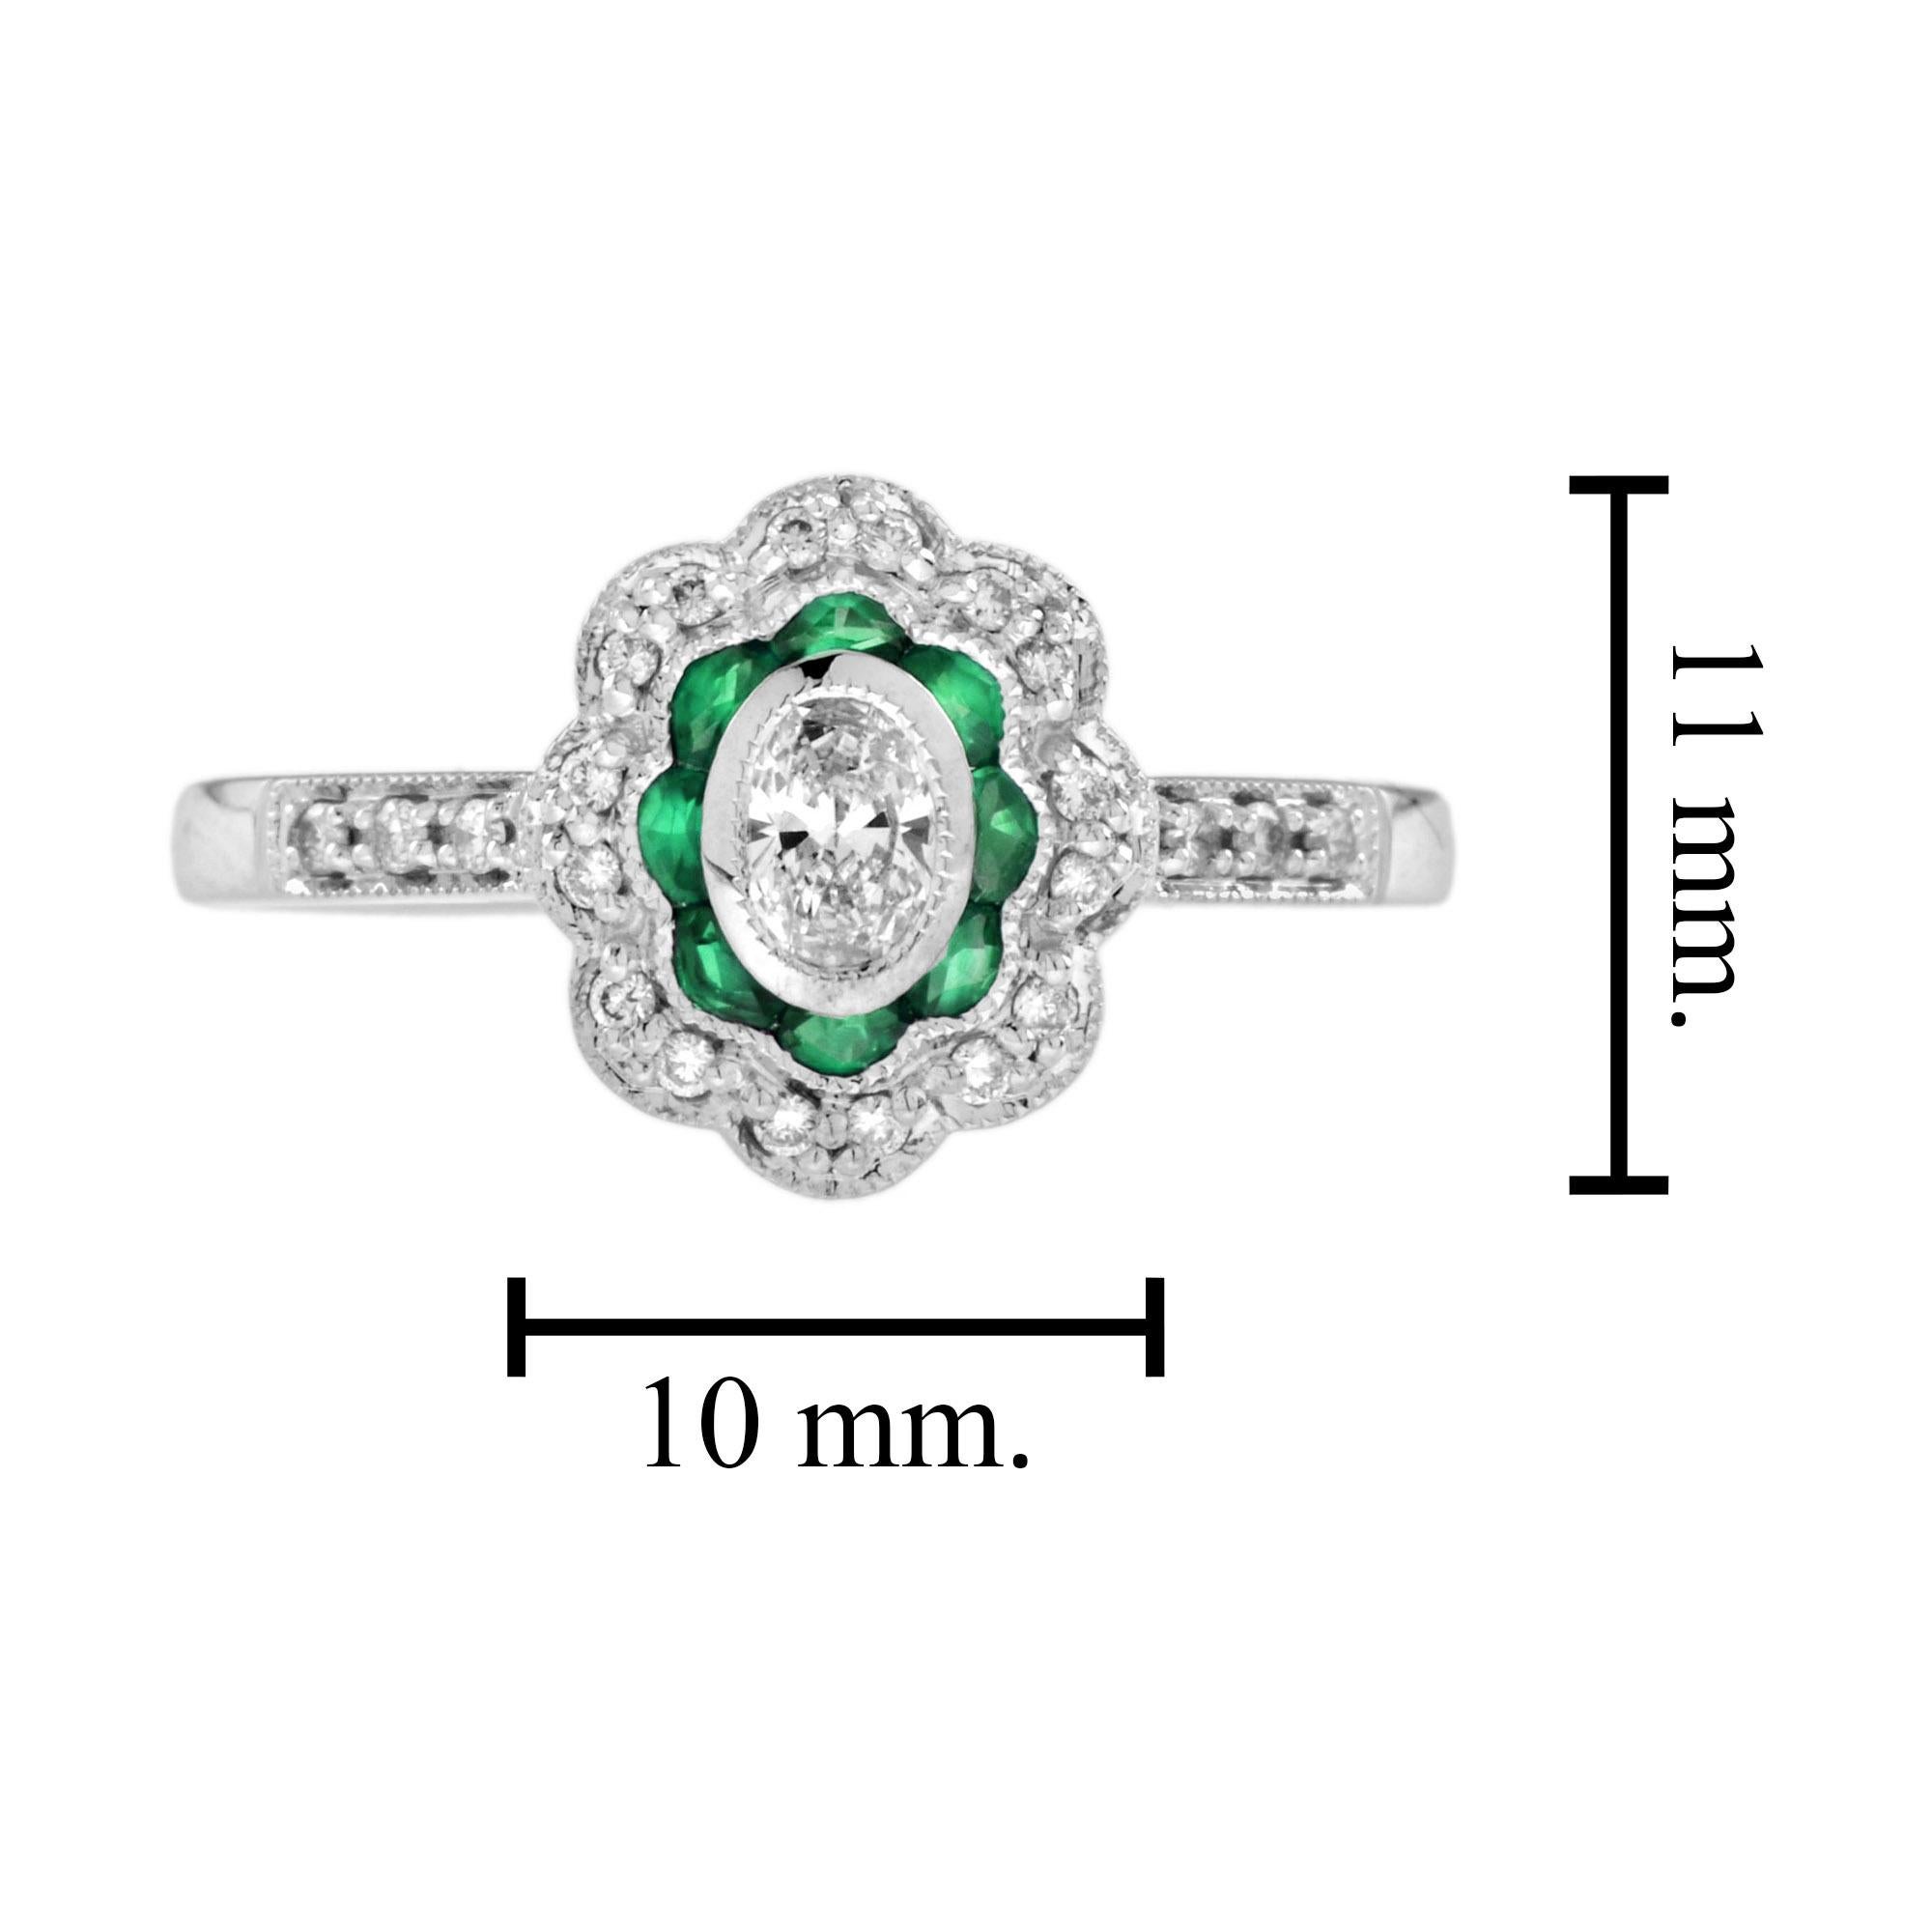 0.15 Ct. Diamond and Emerald Art Deco Style Engagement Ring in 18K White Gold For Sale 2